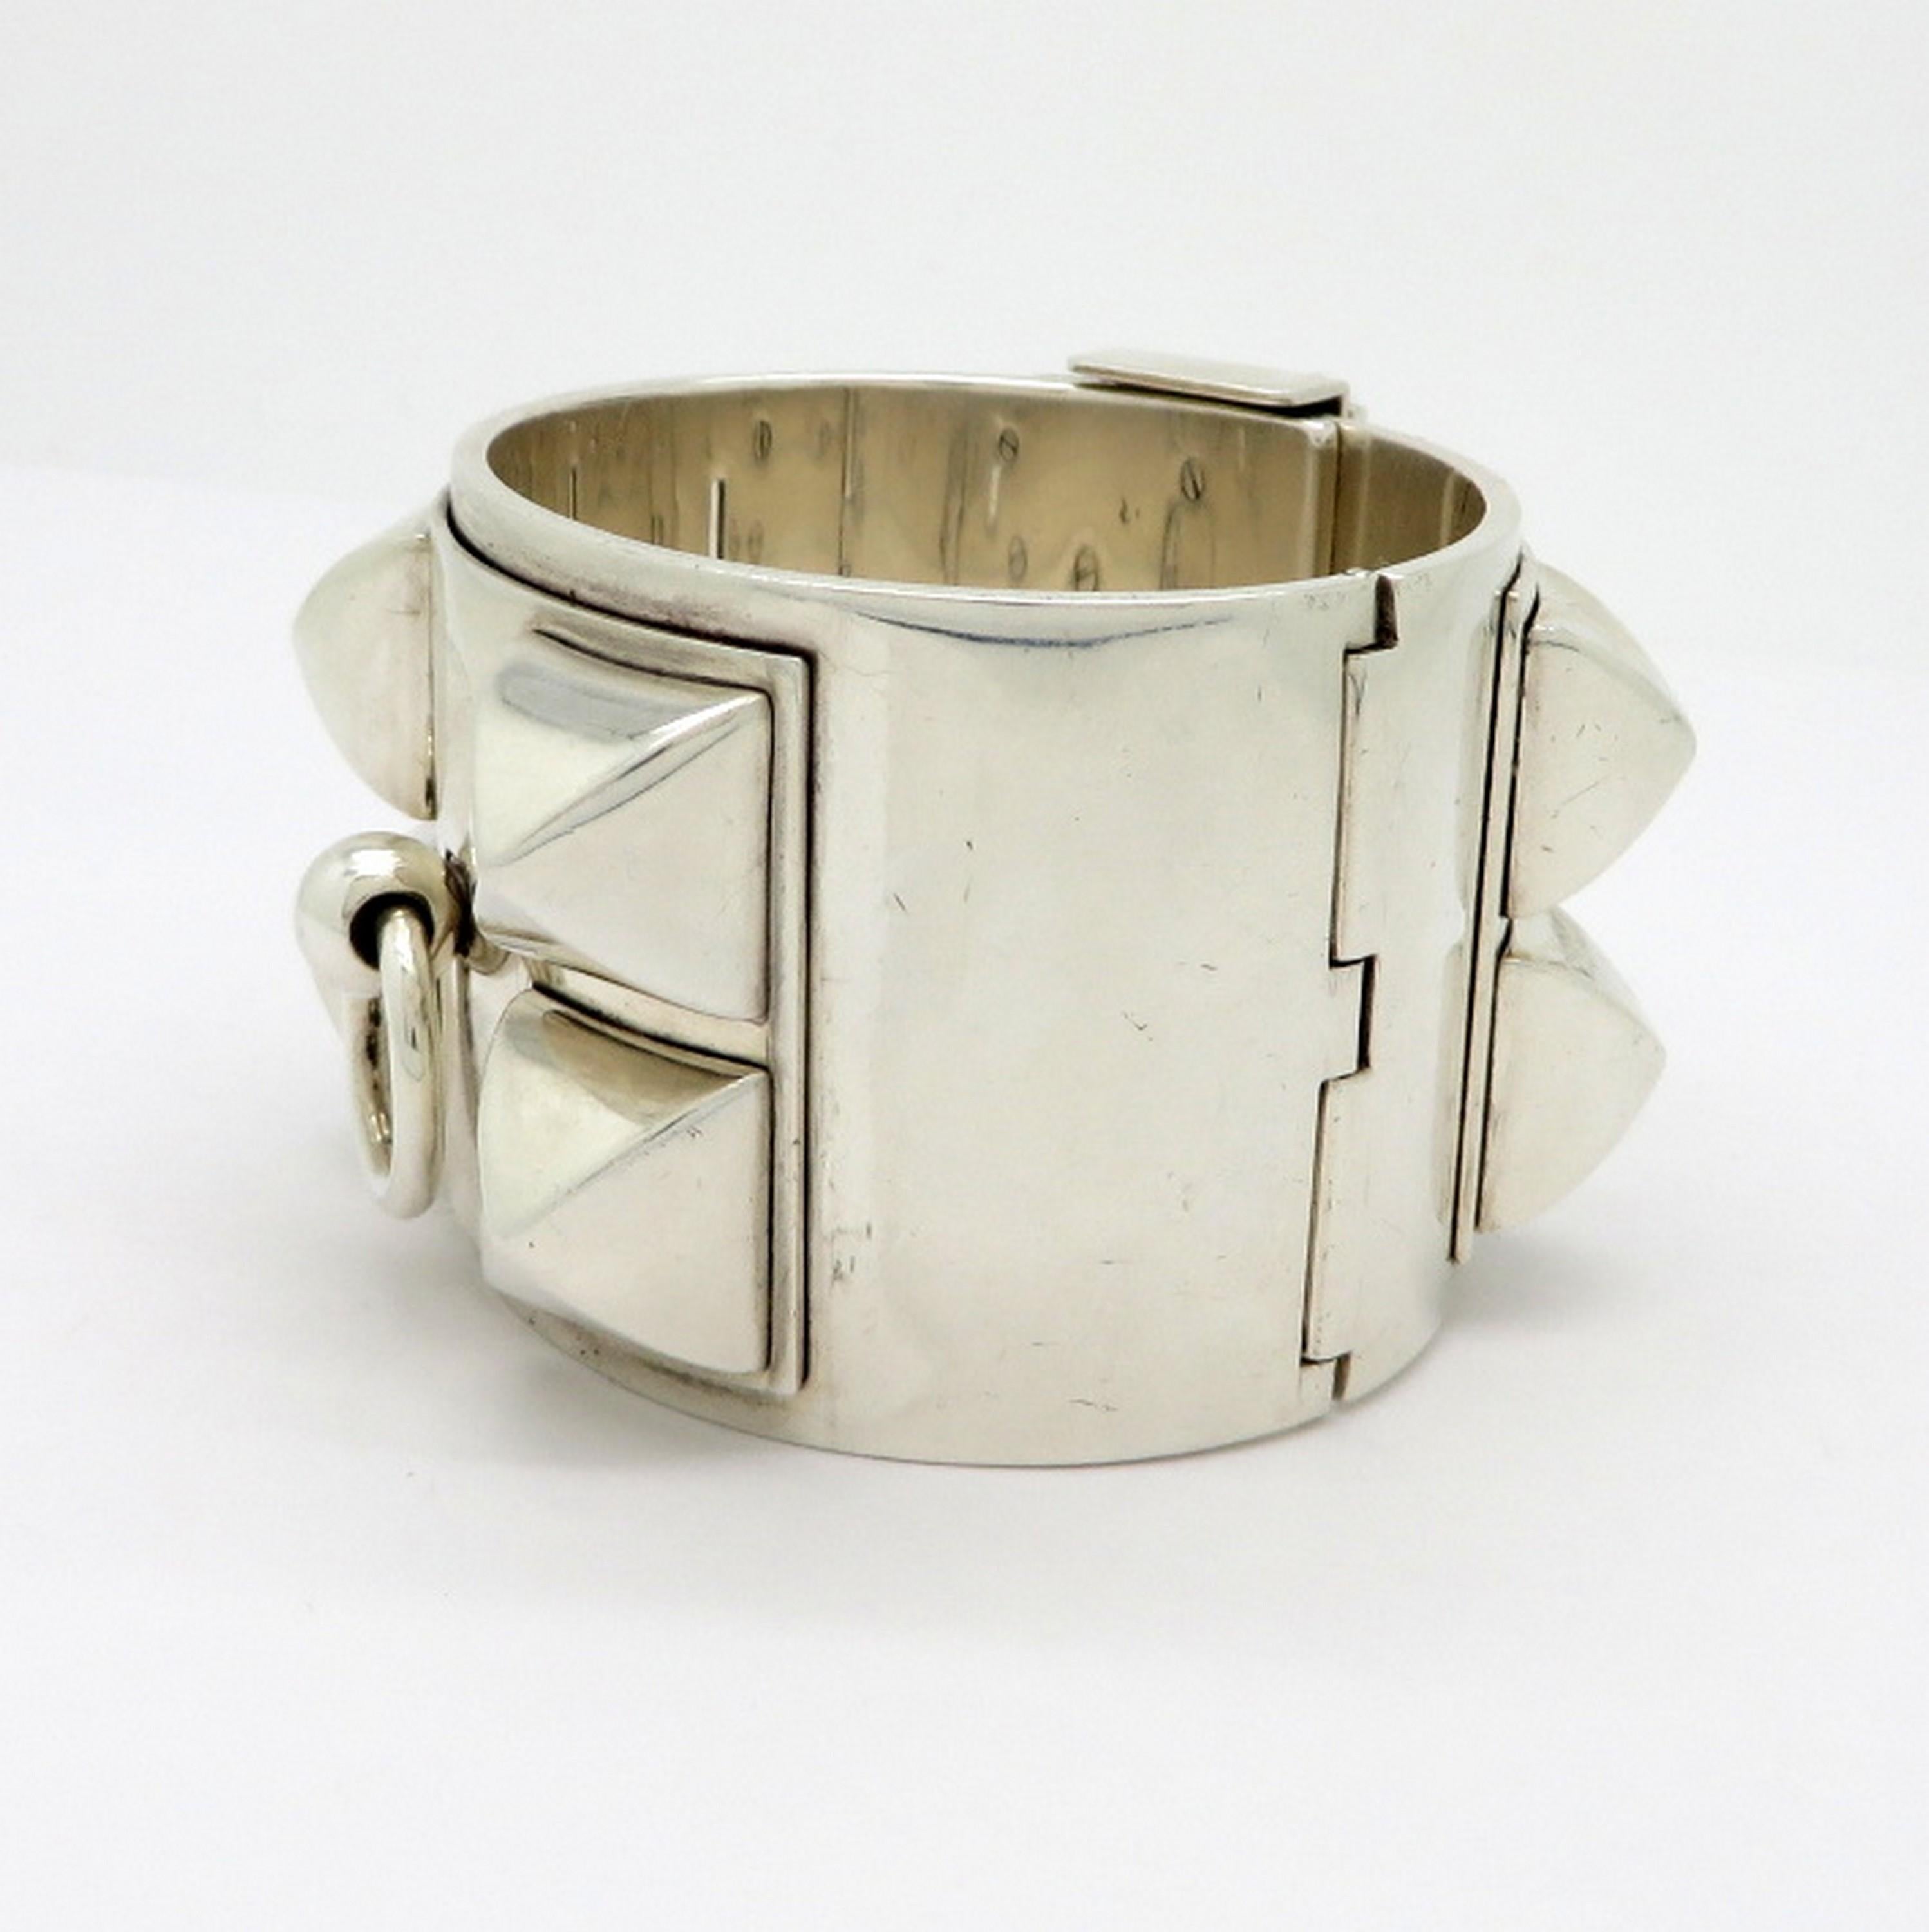 Designer Hermes Collier de Chien cuff bangle bracelet.  Size SH #13B14441.  The designer Hermes box and pouch are included. Hallmarked: Hermes made in Germany Ag 925 AD SH 13B14441.  The bracelet itself measures 39 mm wide and the inner bracelet